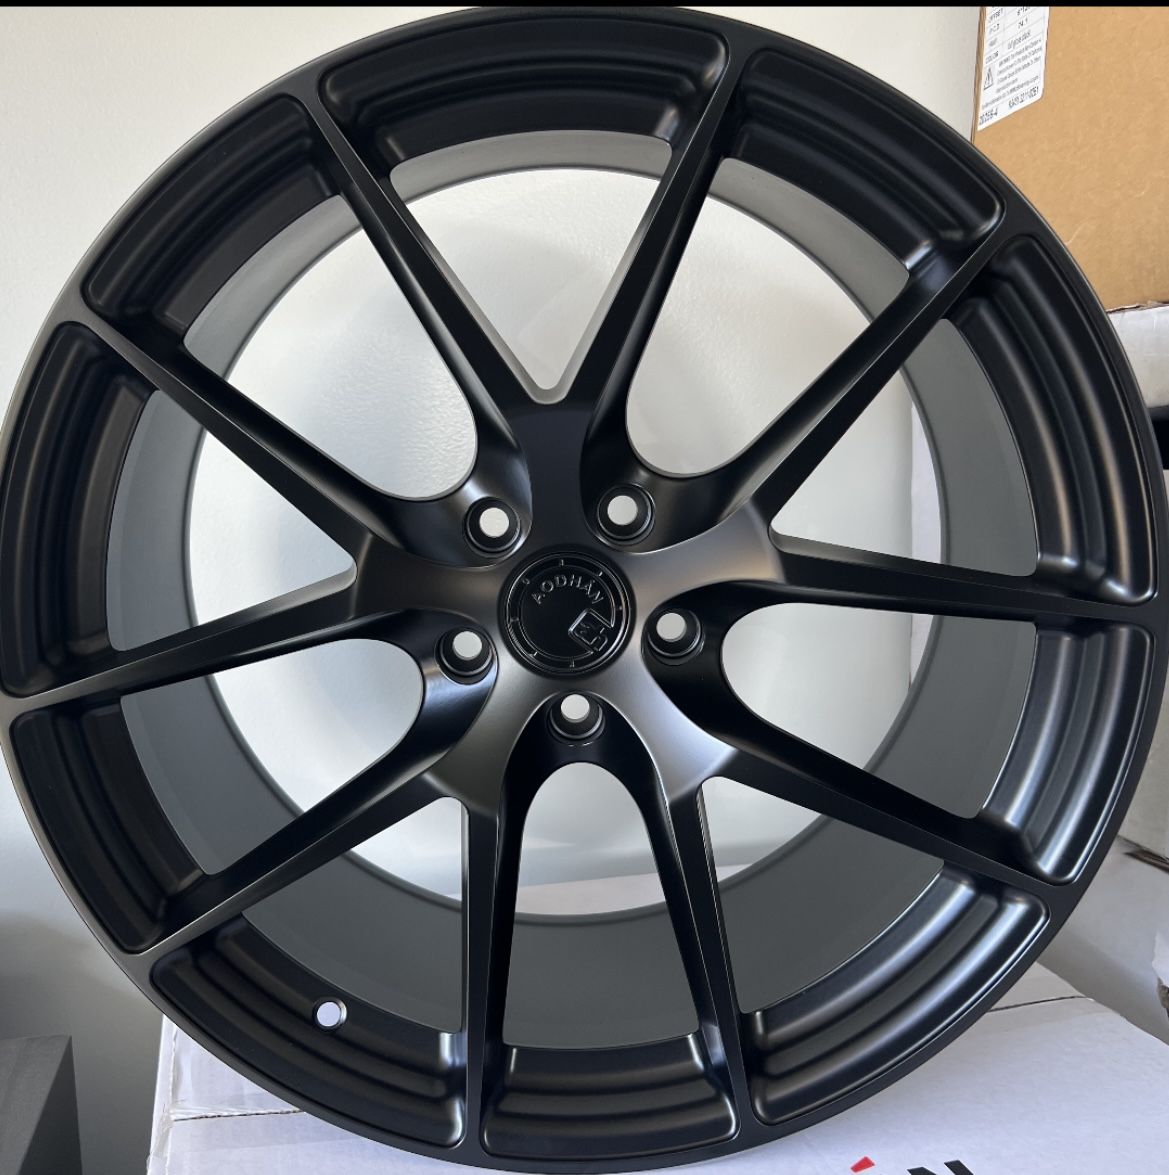 Aodhan 19” Staggered New Flow Form Lire Weight Rims Set Mercedes Audi New Bmw 5x112 Bolt pattern 